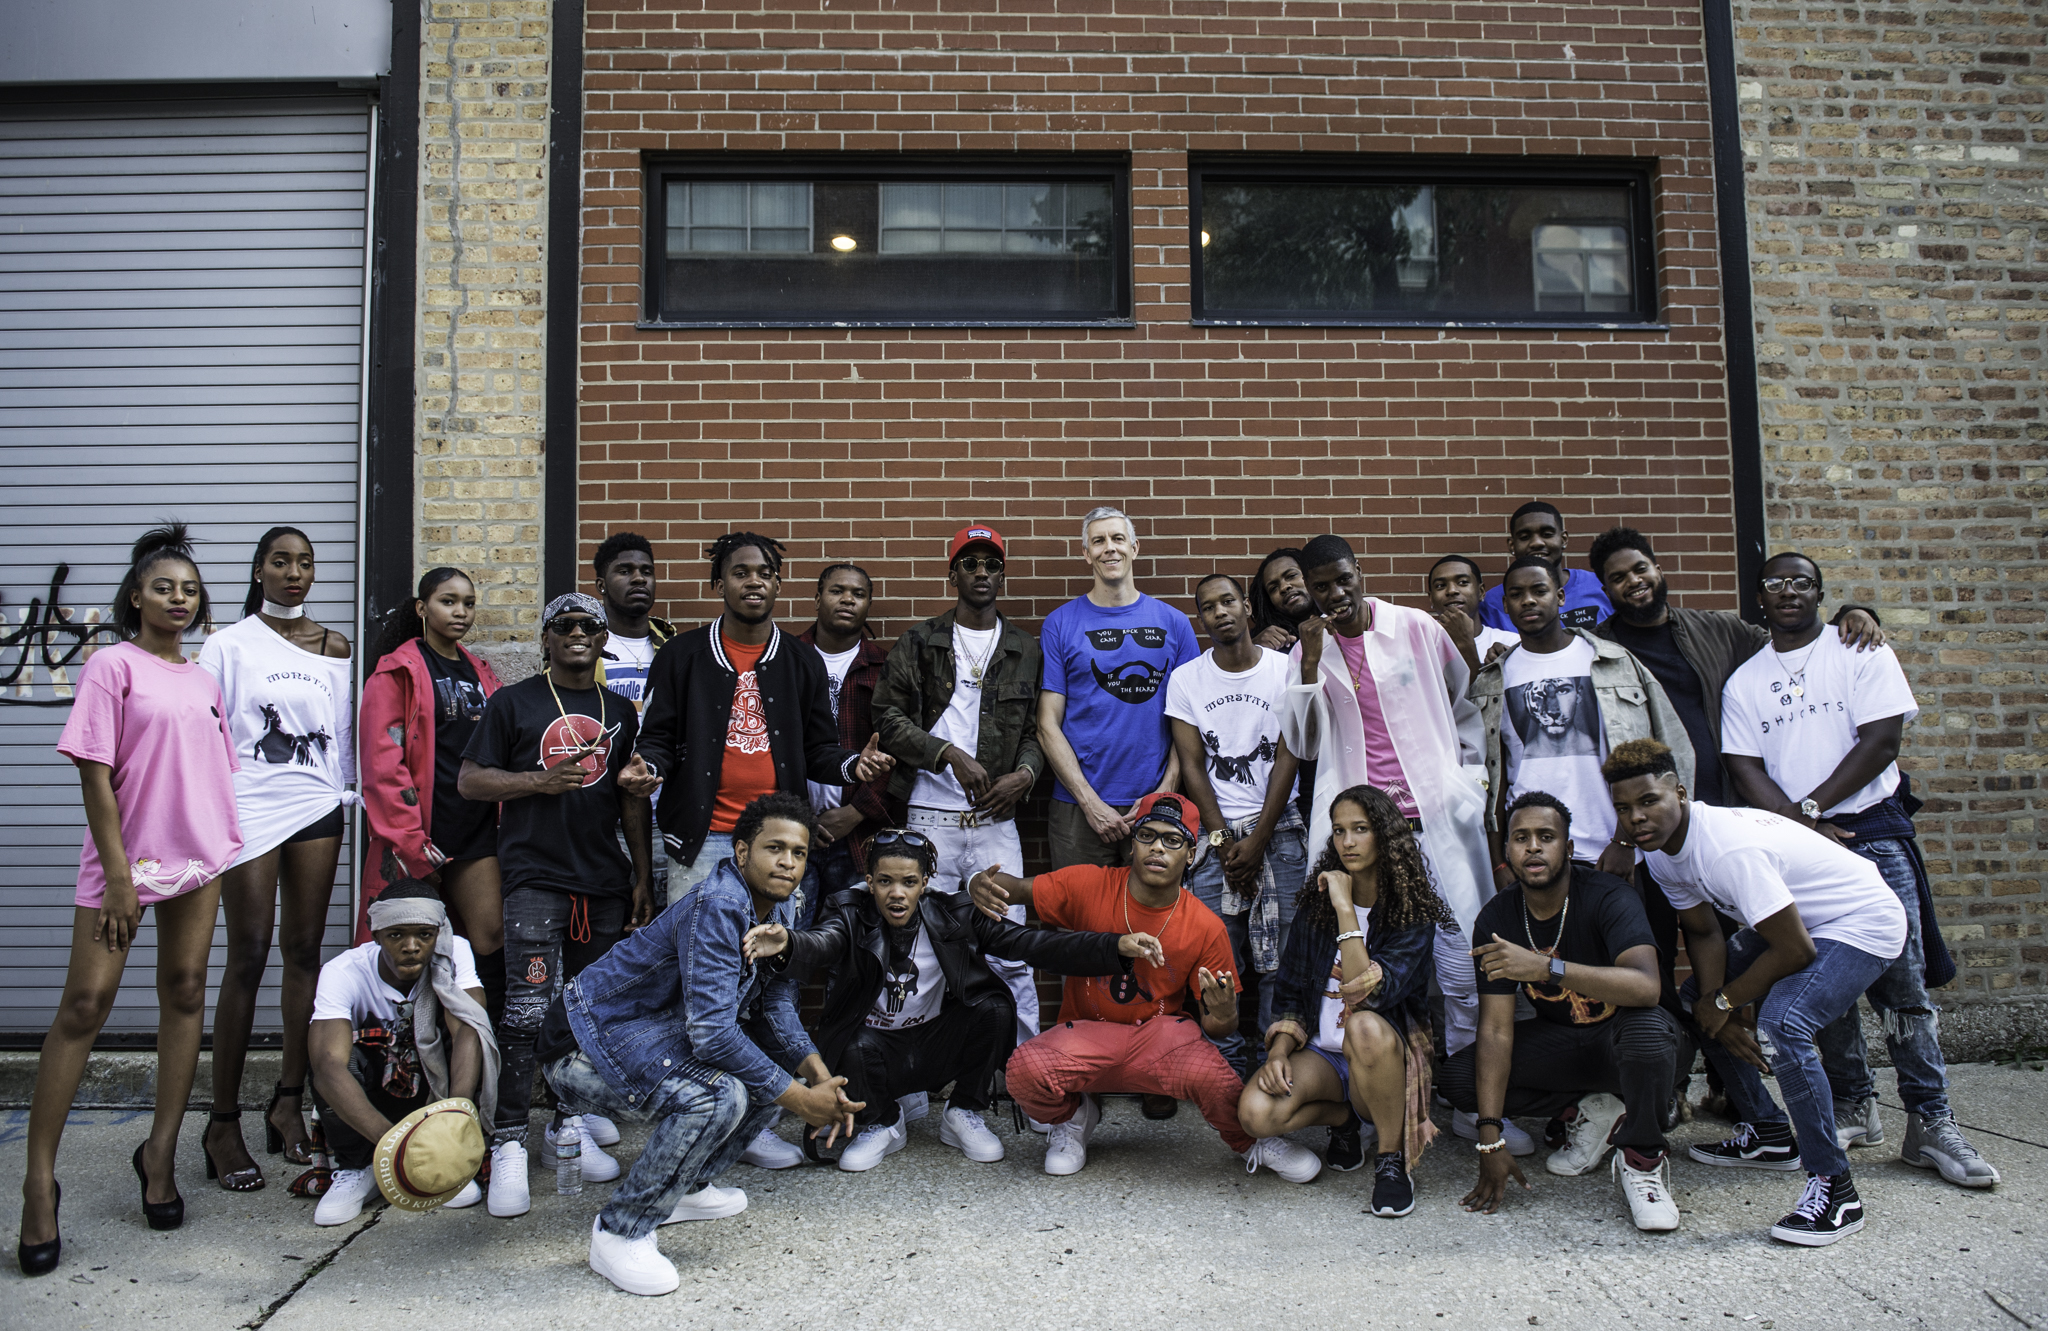 Virgil Abloh Creates A Pioneering Resource Centre For Young Talent